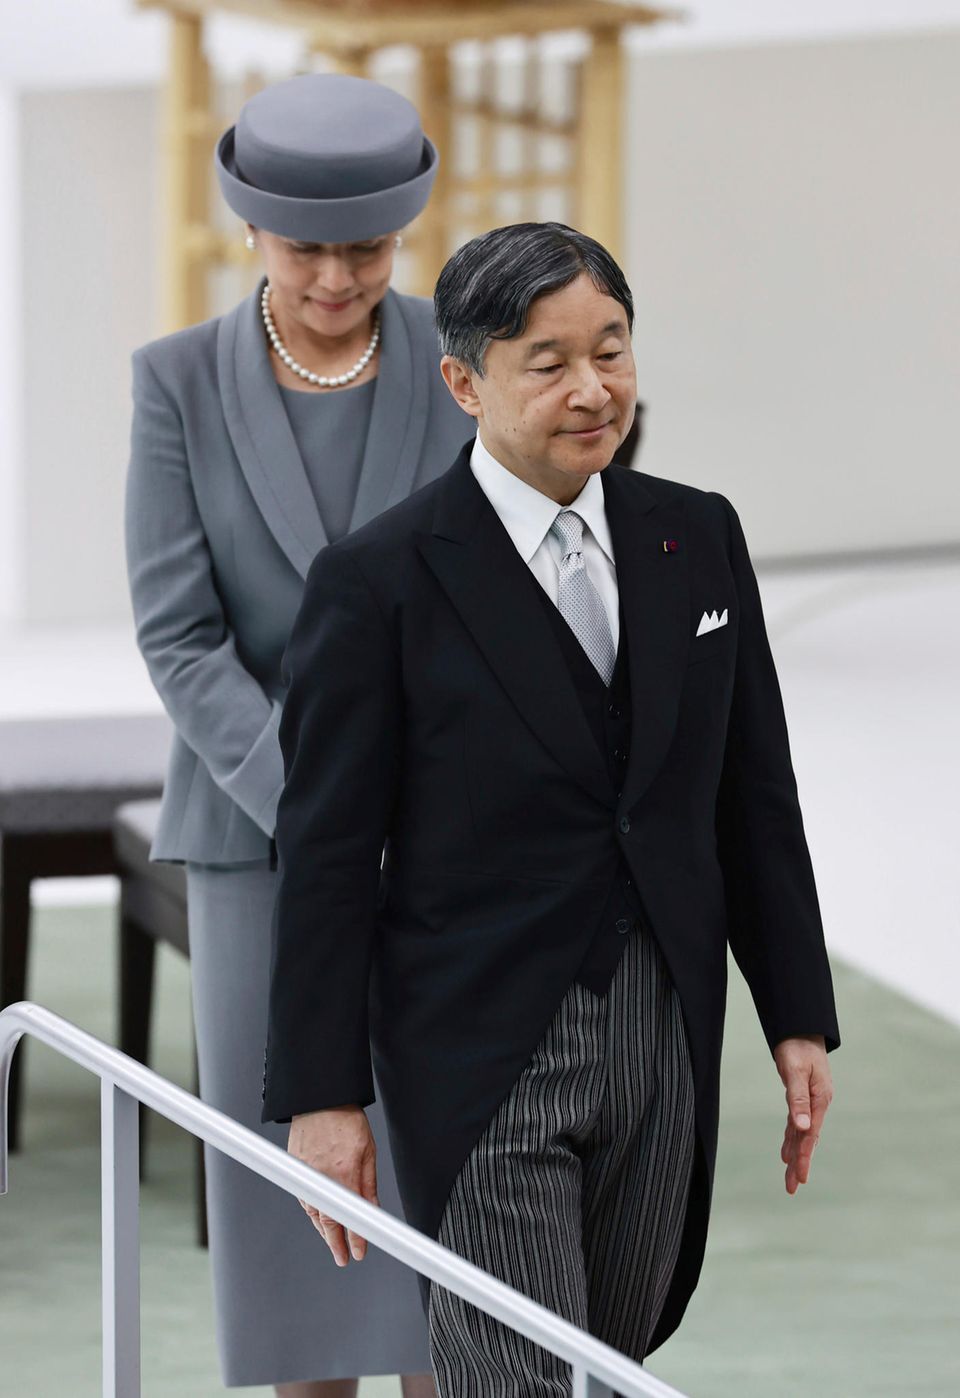 The once successful diplomat and current Empress Masako - always three steps behind her husband.